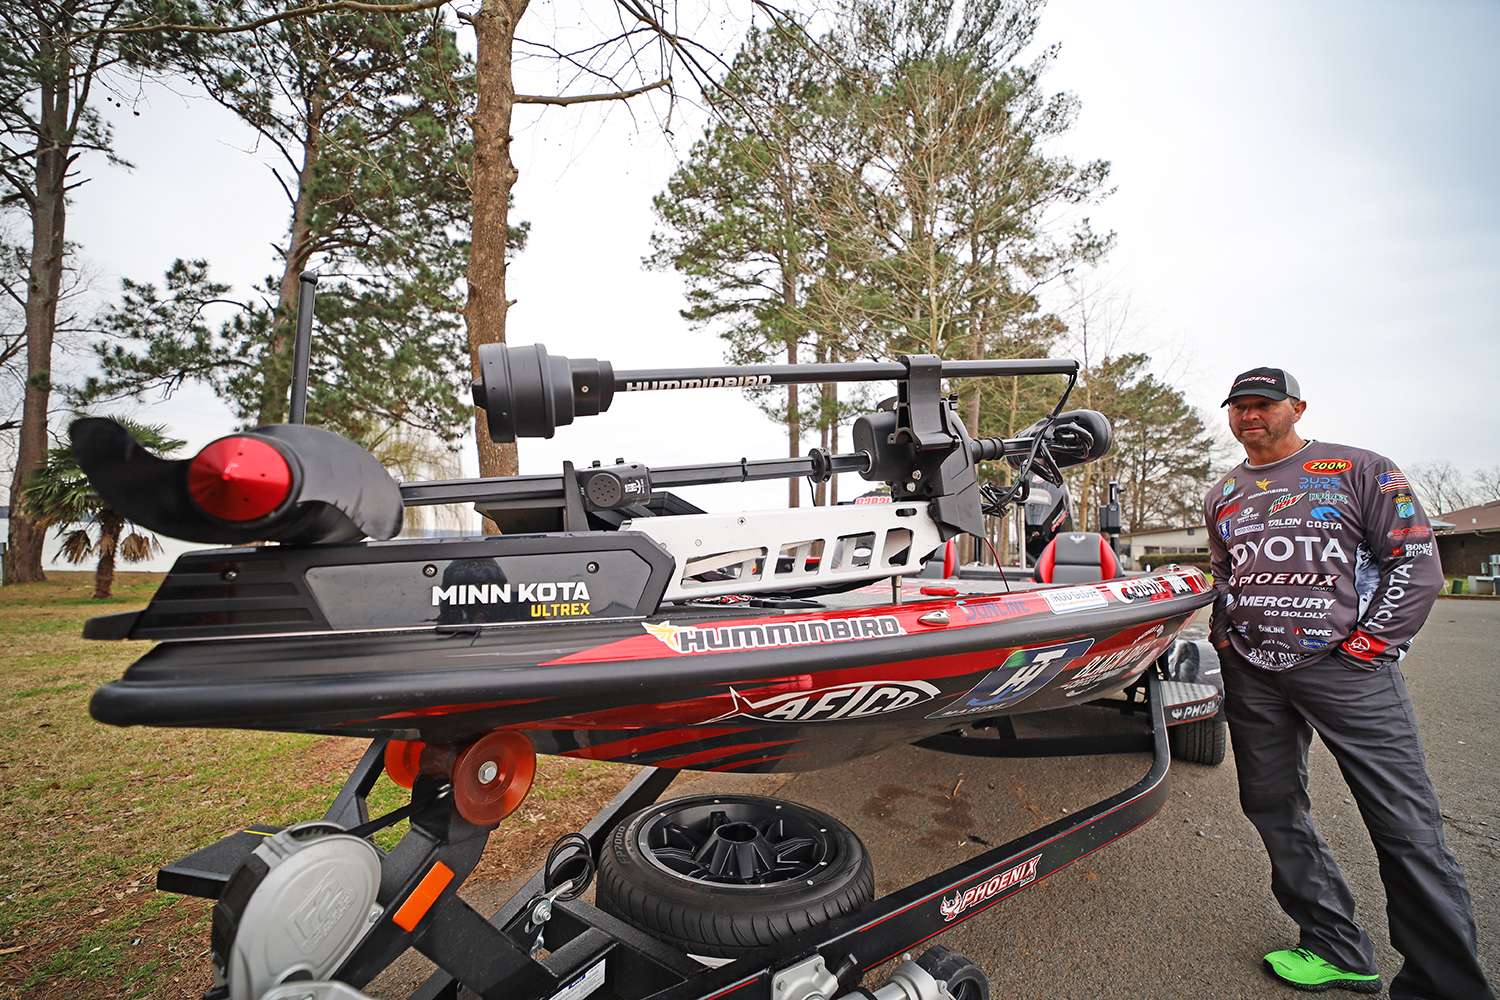 As you'd expect, his rig is outfitted with all the latest and greatest, technologically advanced hardware the dedicated and serious bass angler needs.